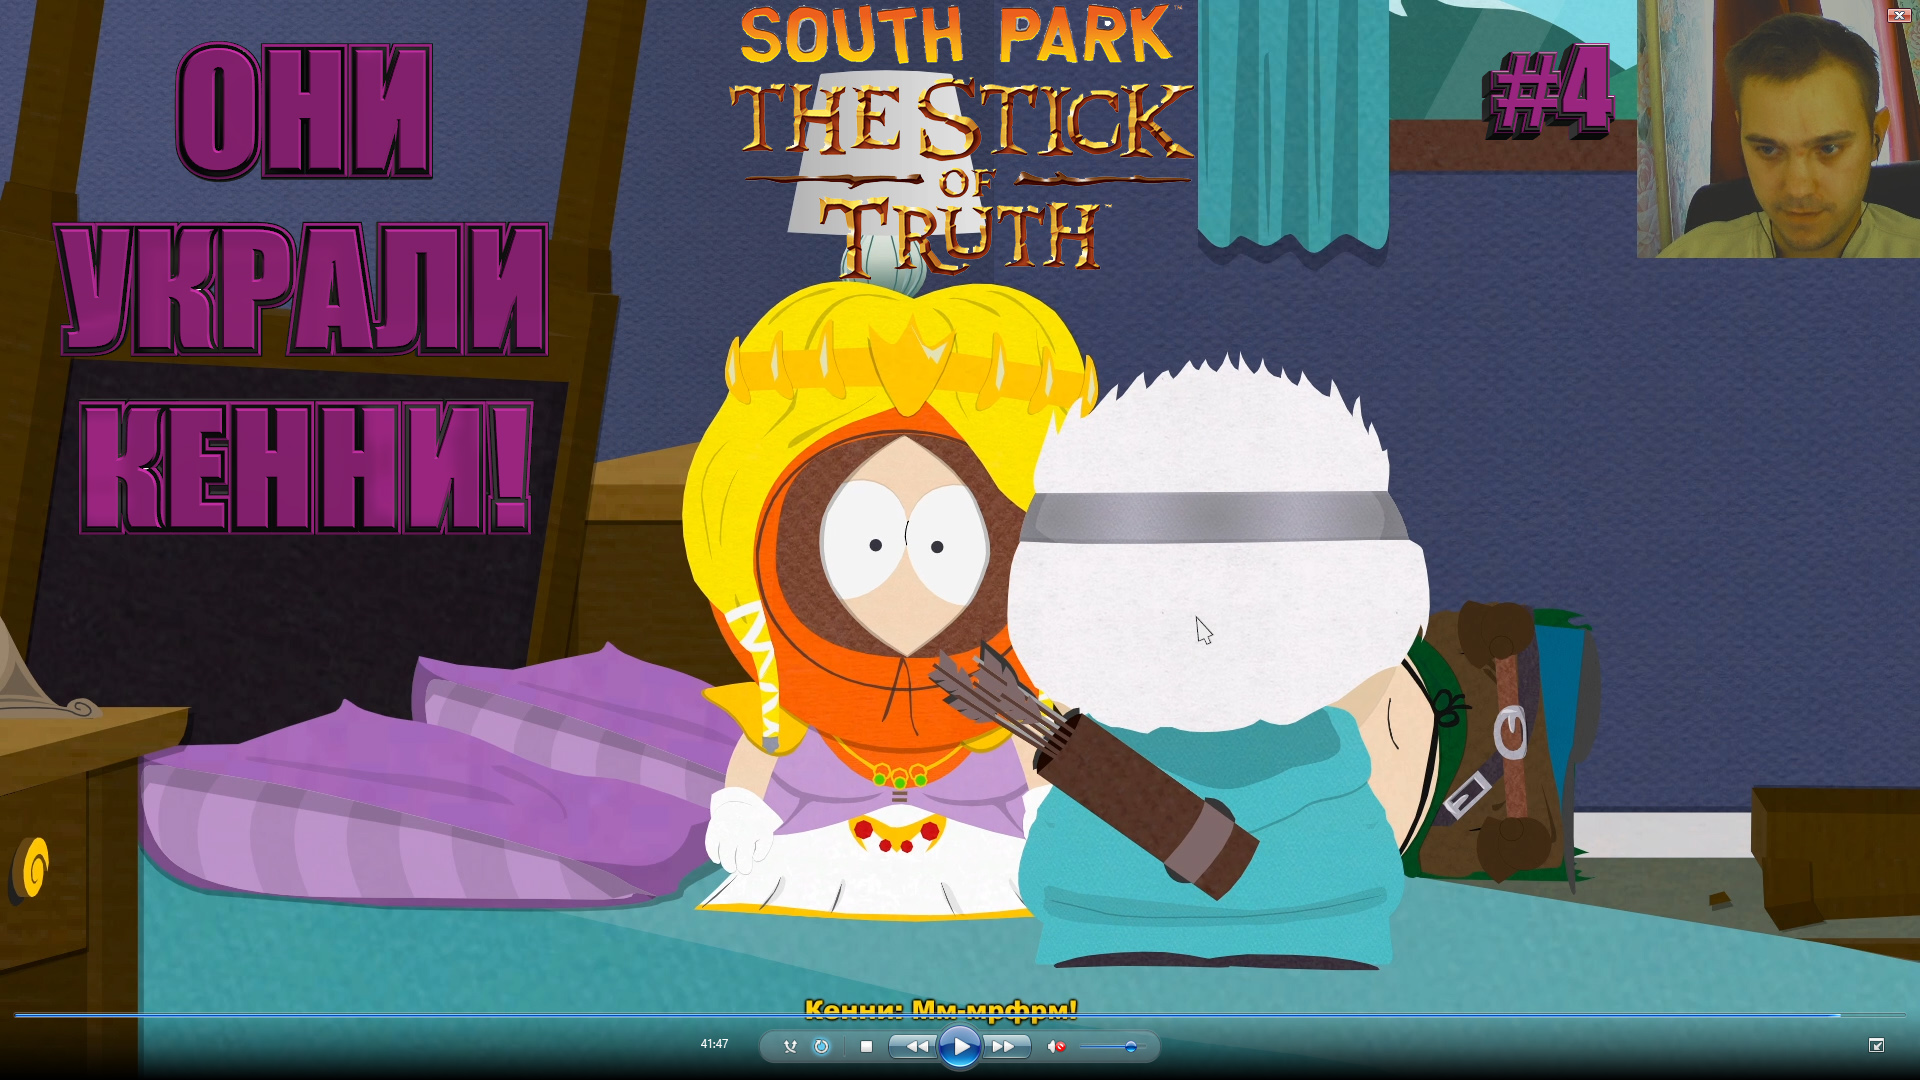 South Park: The Stick of Truth #4. ОНИ УКРАЛИ КЕННИ.